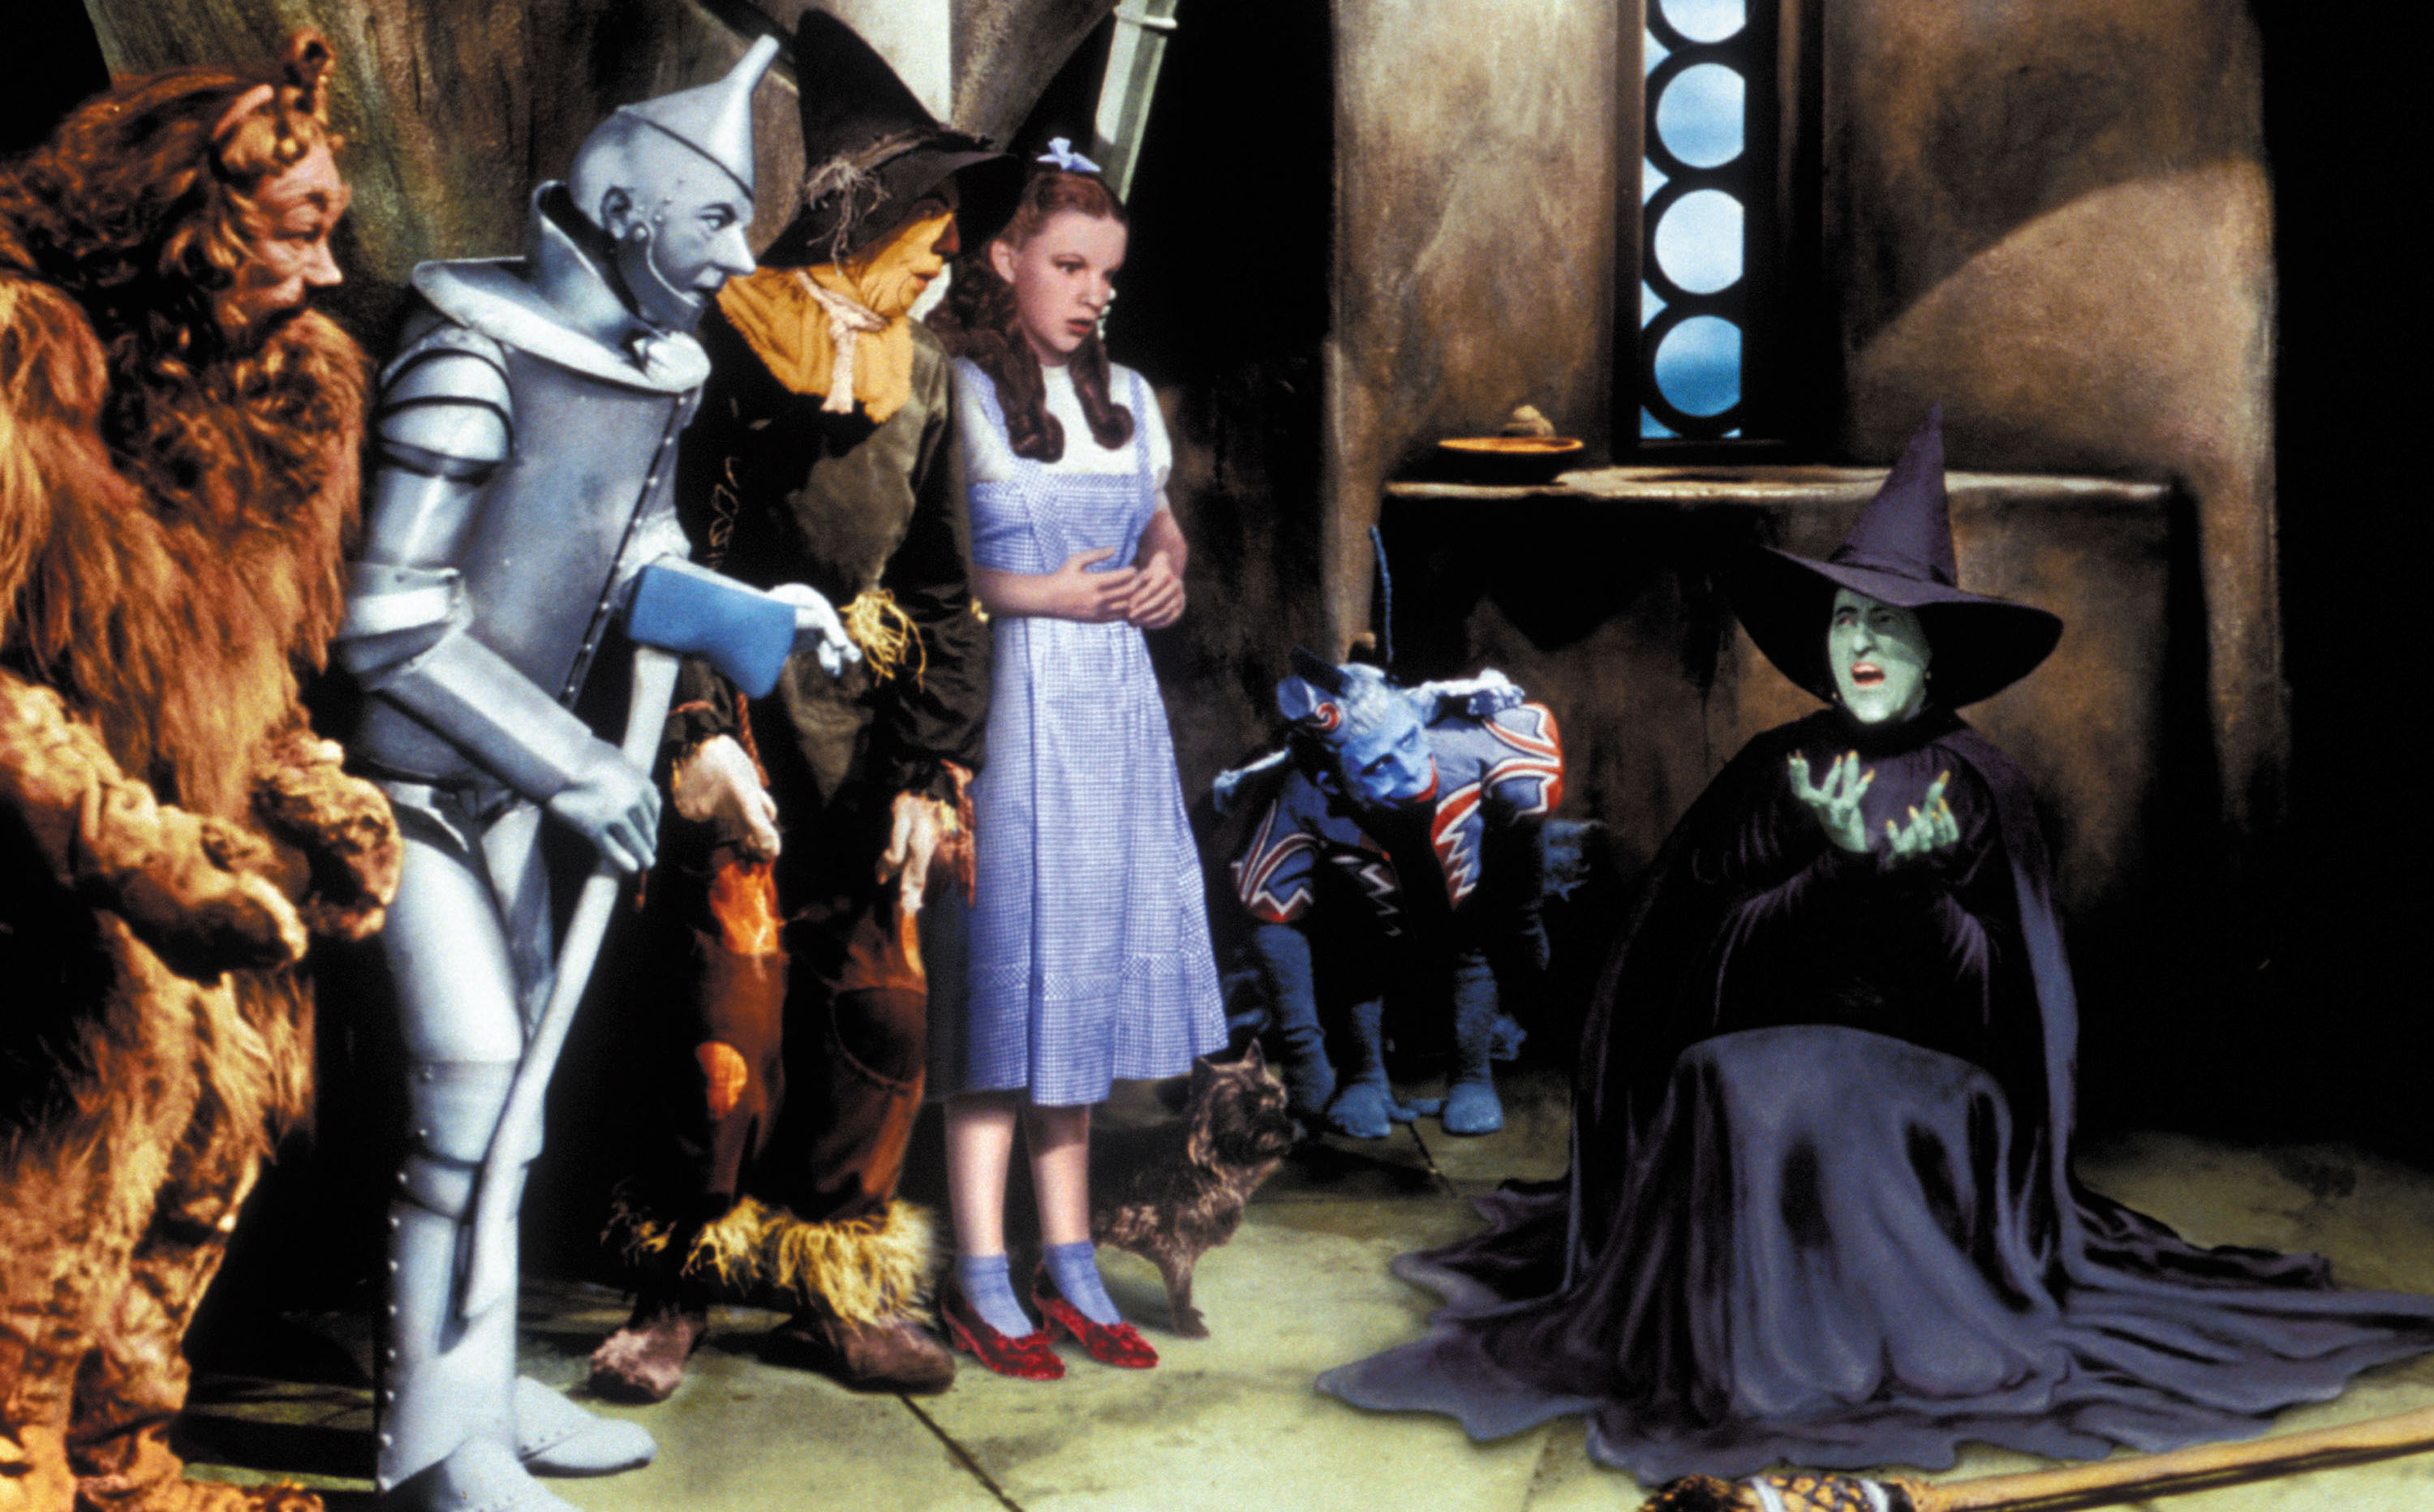 The Wizard of Oz' Is the Most Influential Film Ever